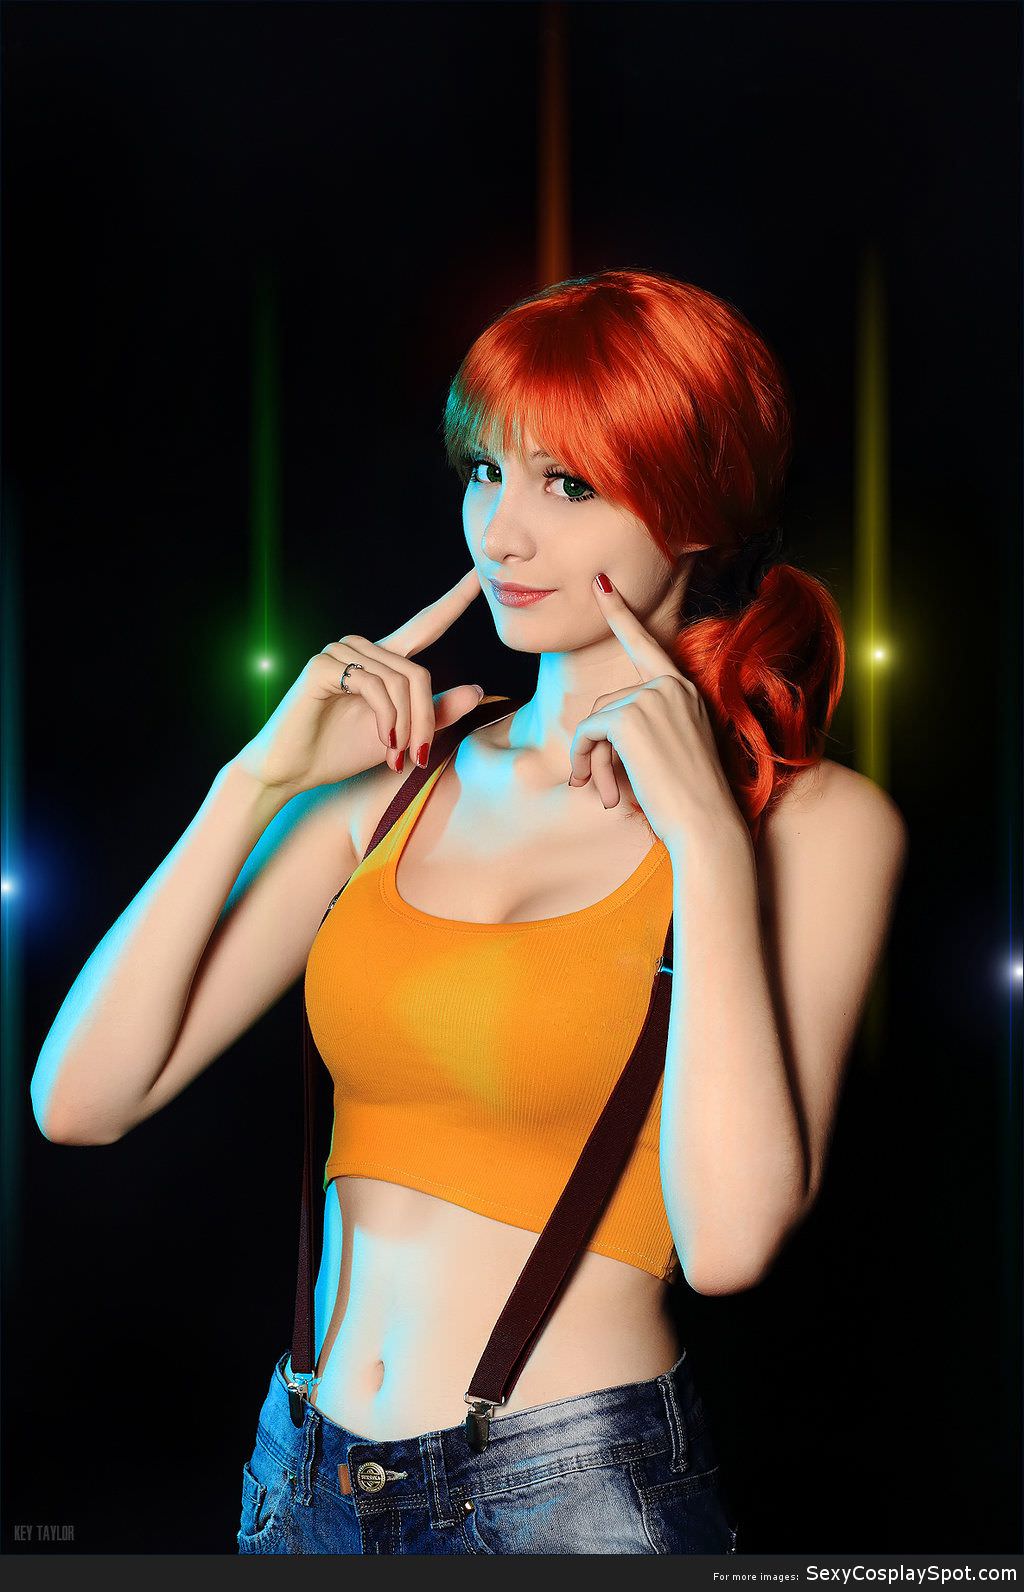 mari evans misty - Key Taylor For more images. Sexy CosplaySpot.com